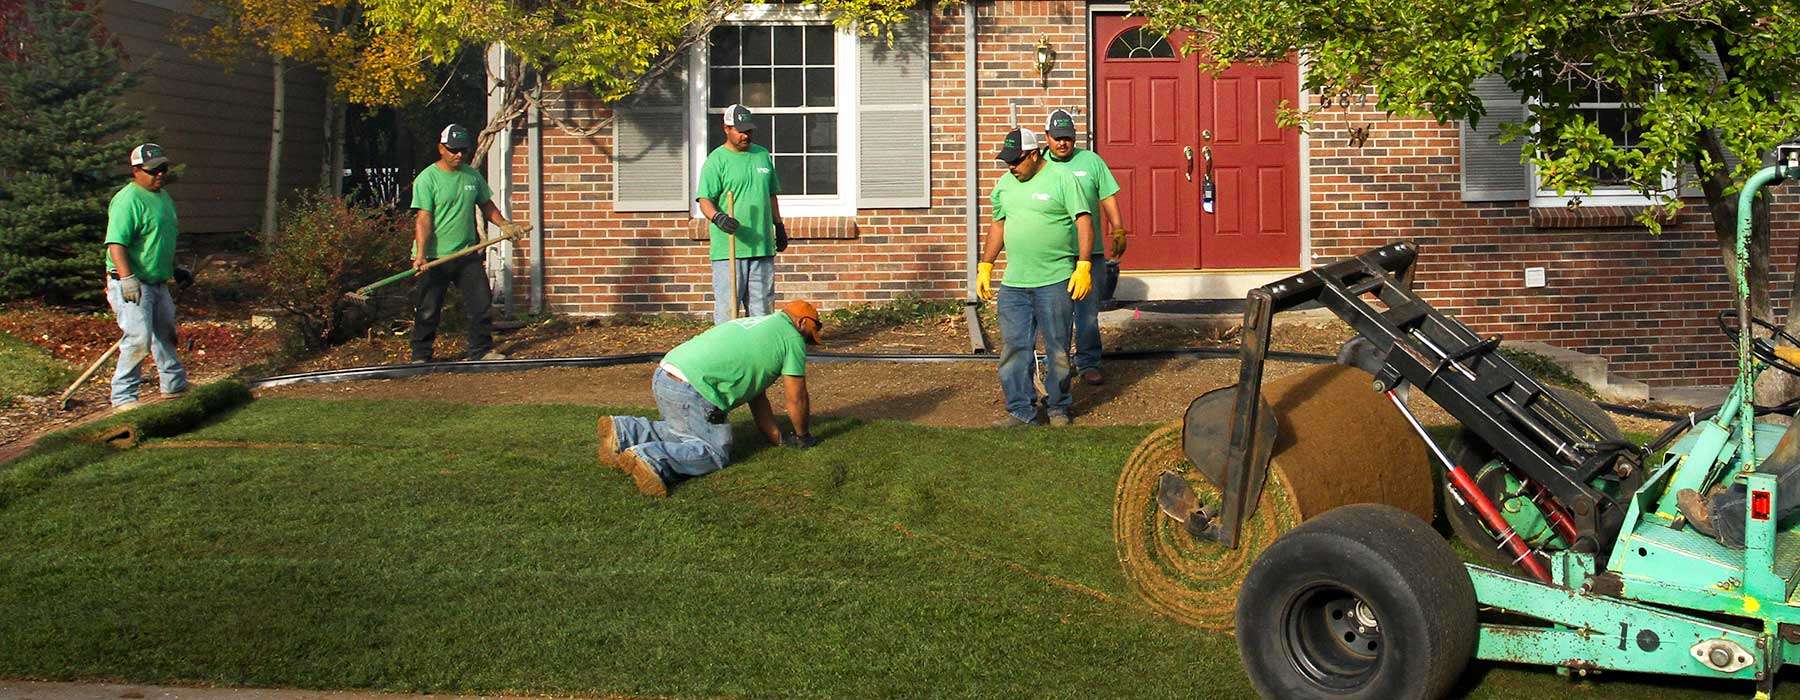 Green Valley Turf Co. installs sod in and around Denver, Colorado.